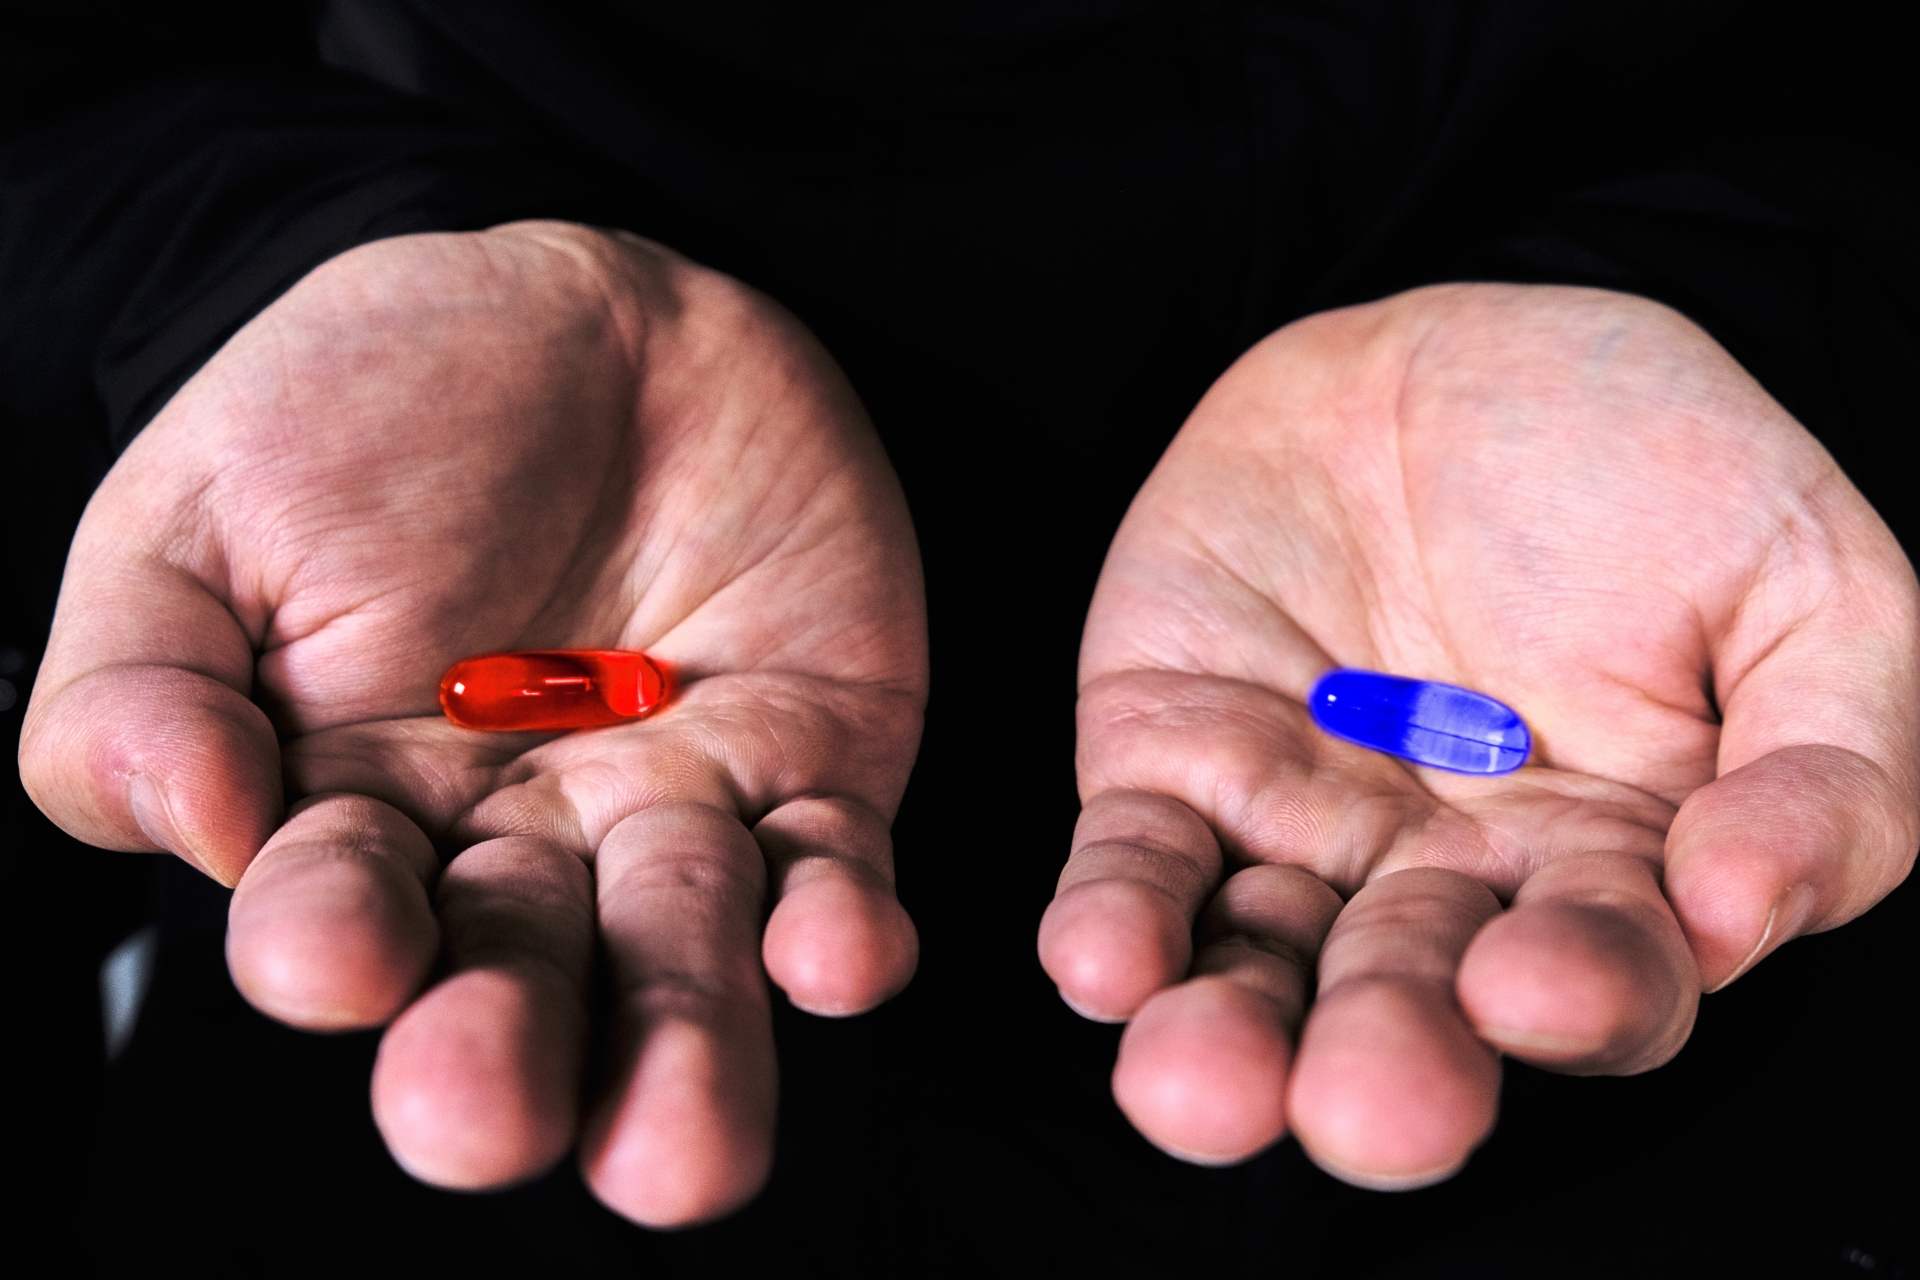 A red pill on the right palm; a blue pill on the left palm.